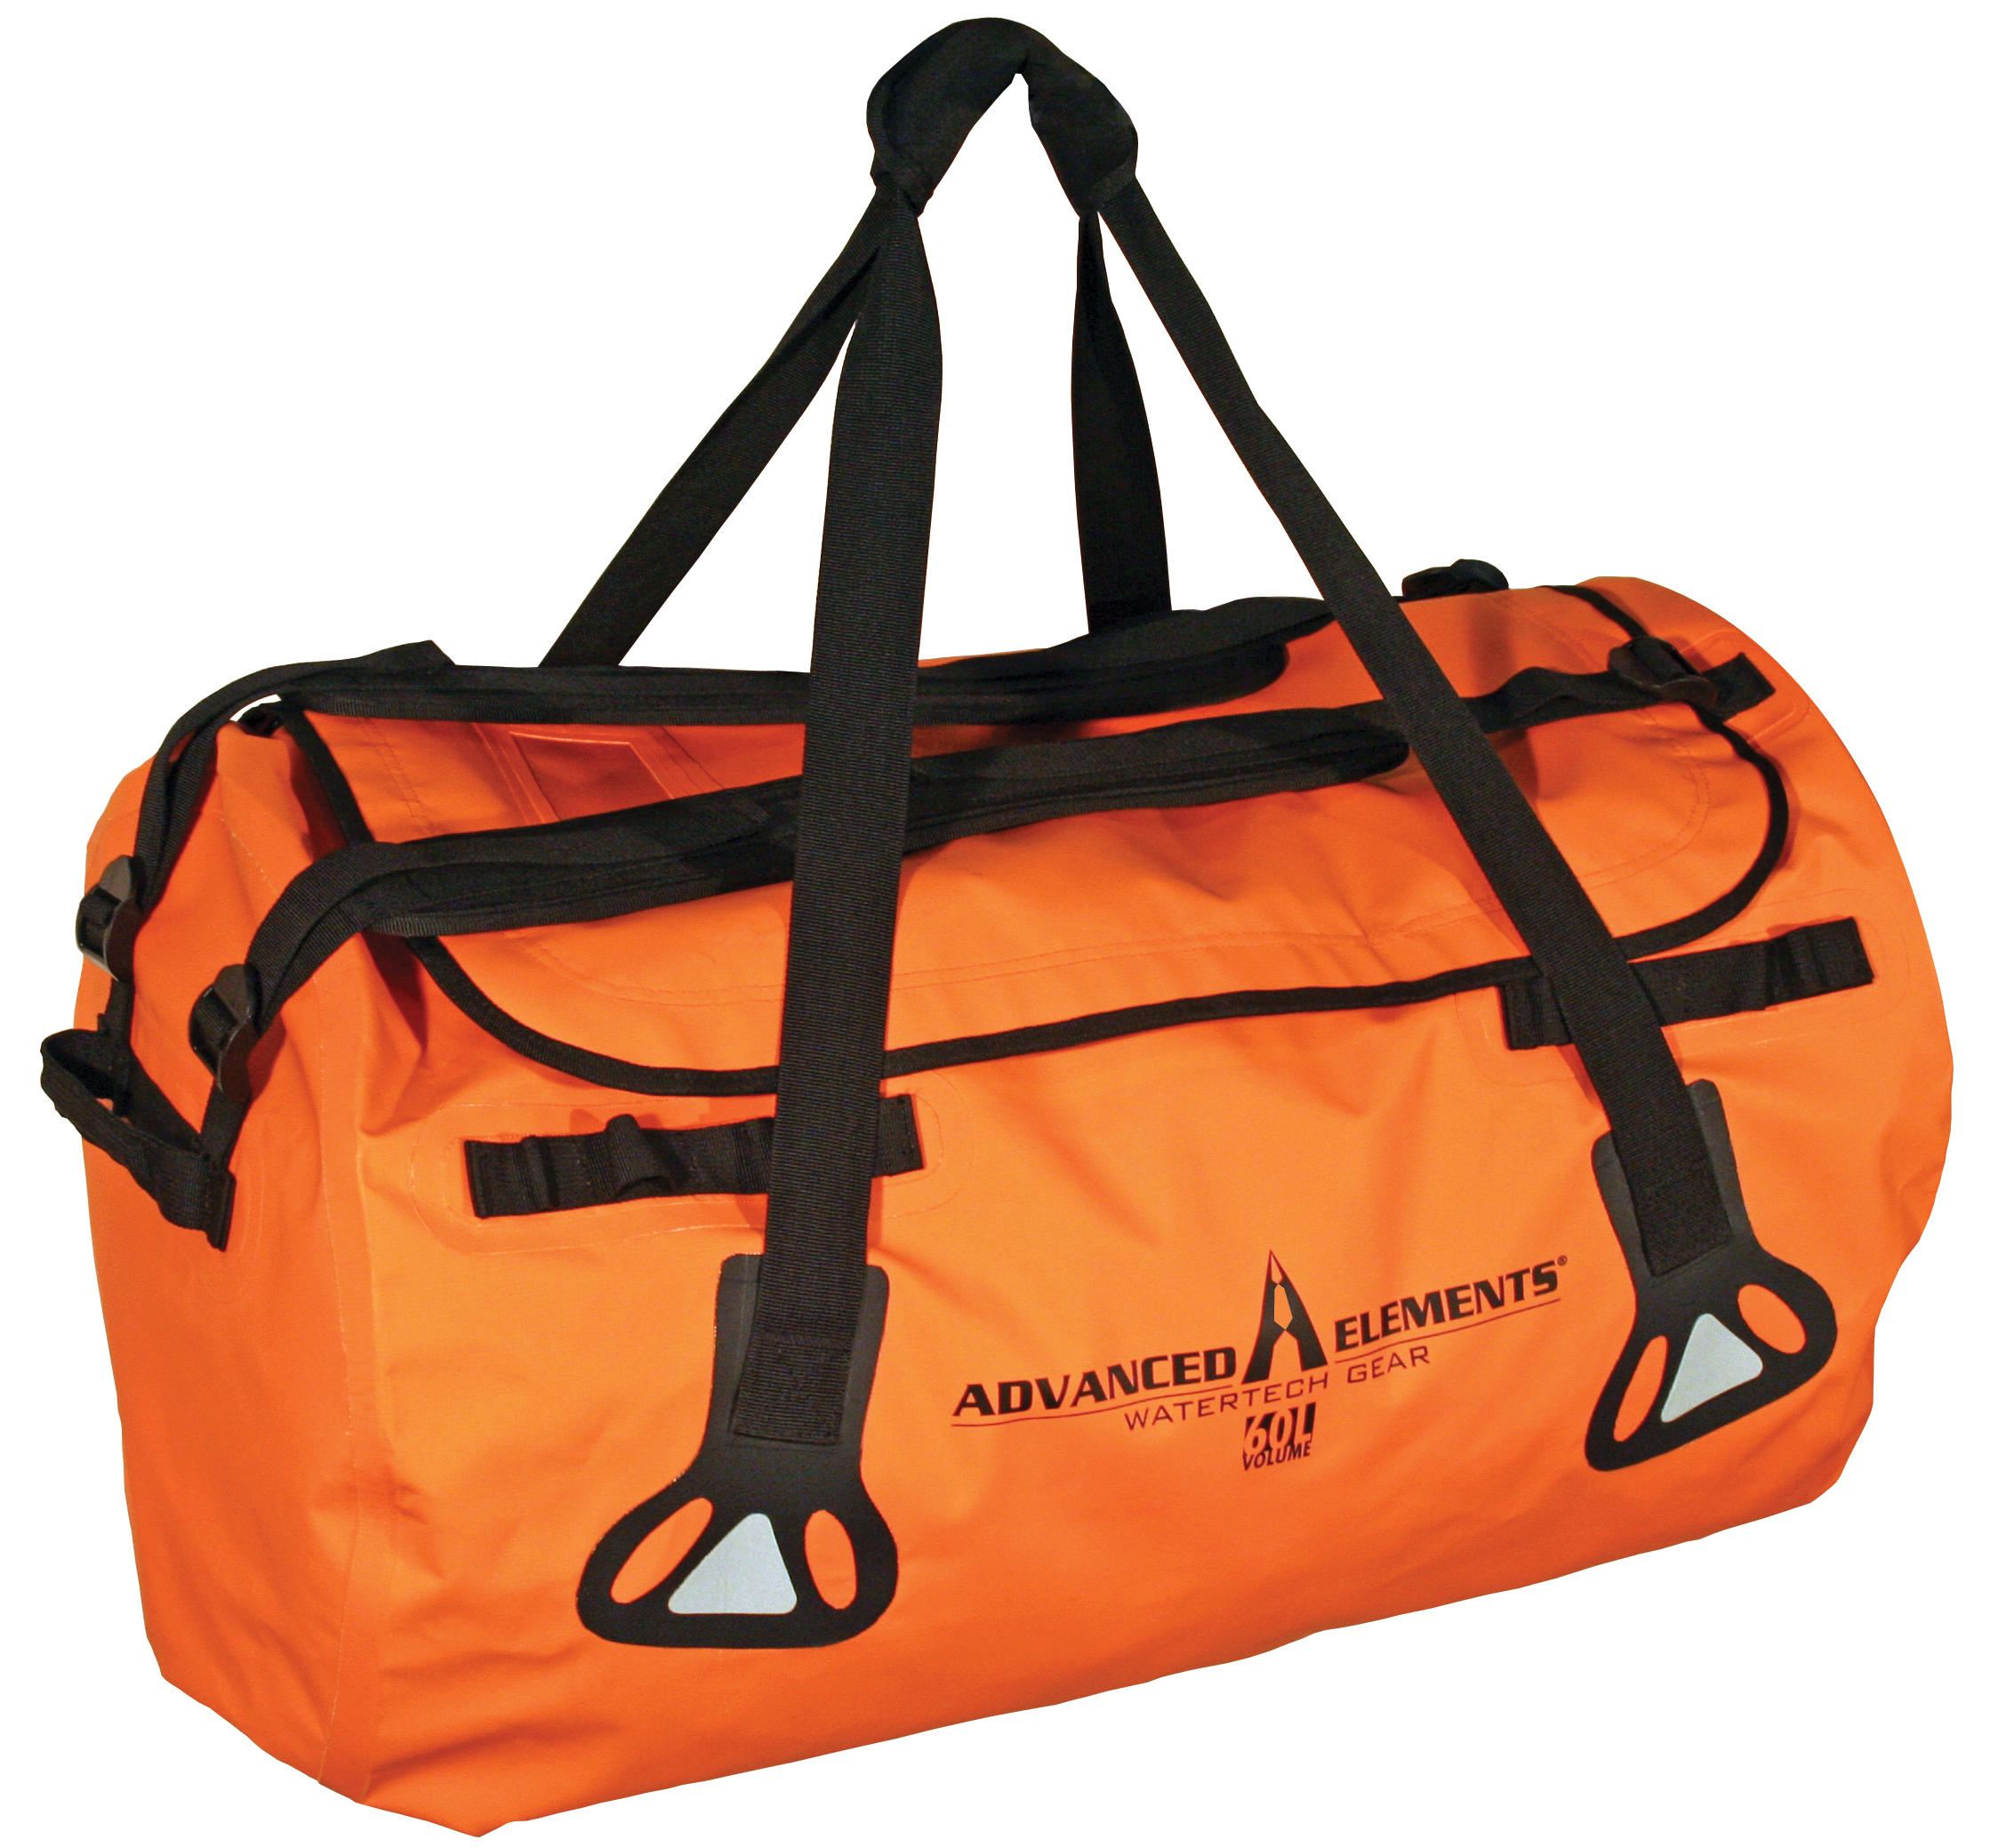 Bags, Boxes, Cases & Packs: Abyss All-Weather Duffel Bag by Advanced Elements - Image 4680